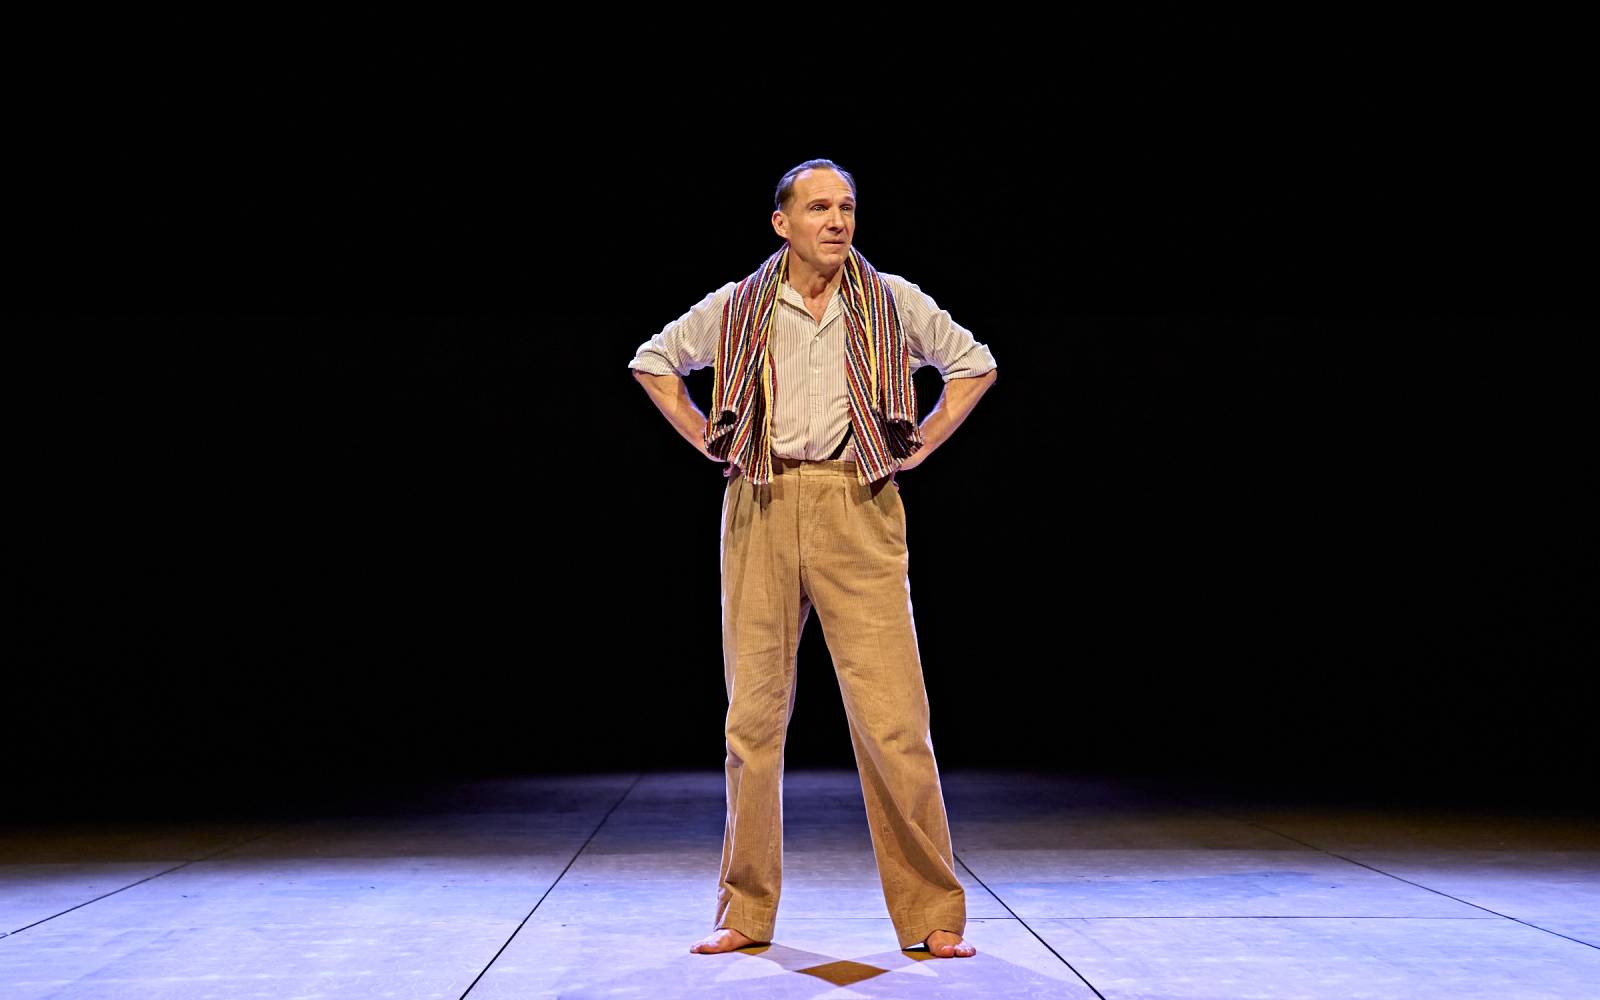 Ralph Fiennes stands centre stage, with darkness behind him. His hands are on his hips and he looks off to the side. He's wearing a white striped shirt with braces connected to the top of his trousers. There's a red and white striped towel hung around his neck.